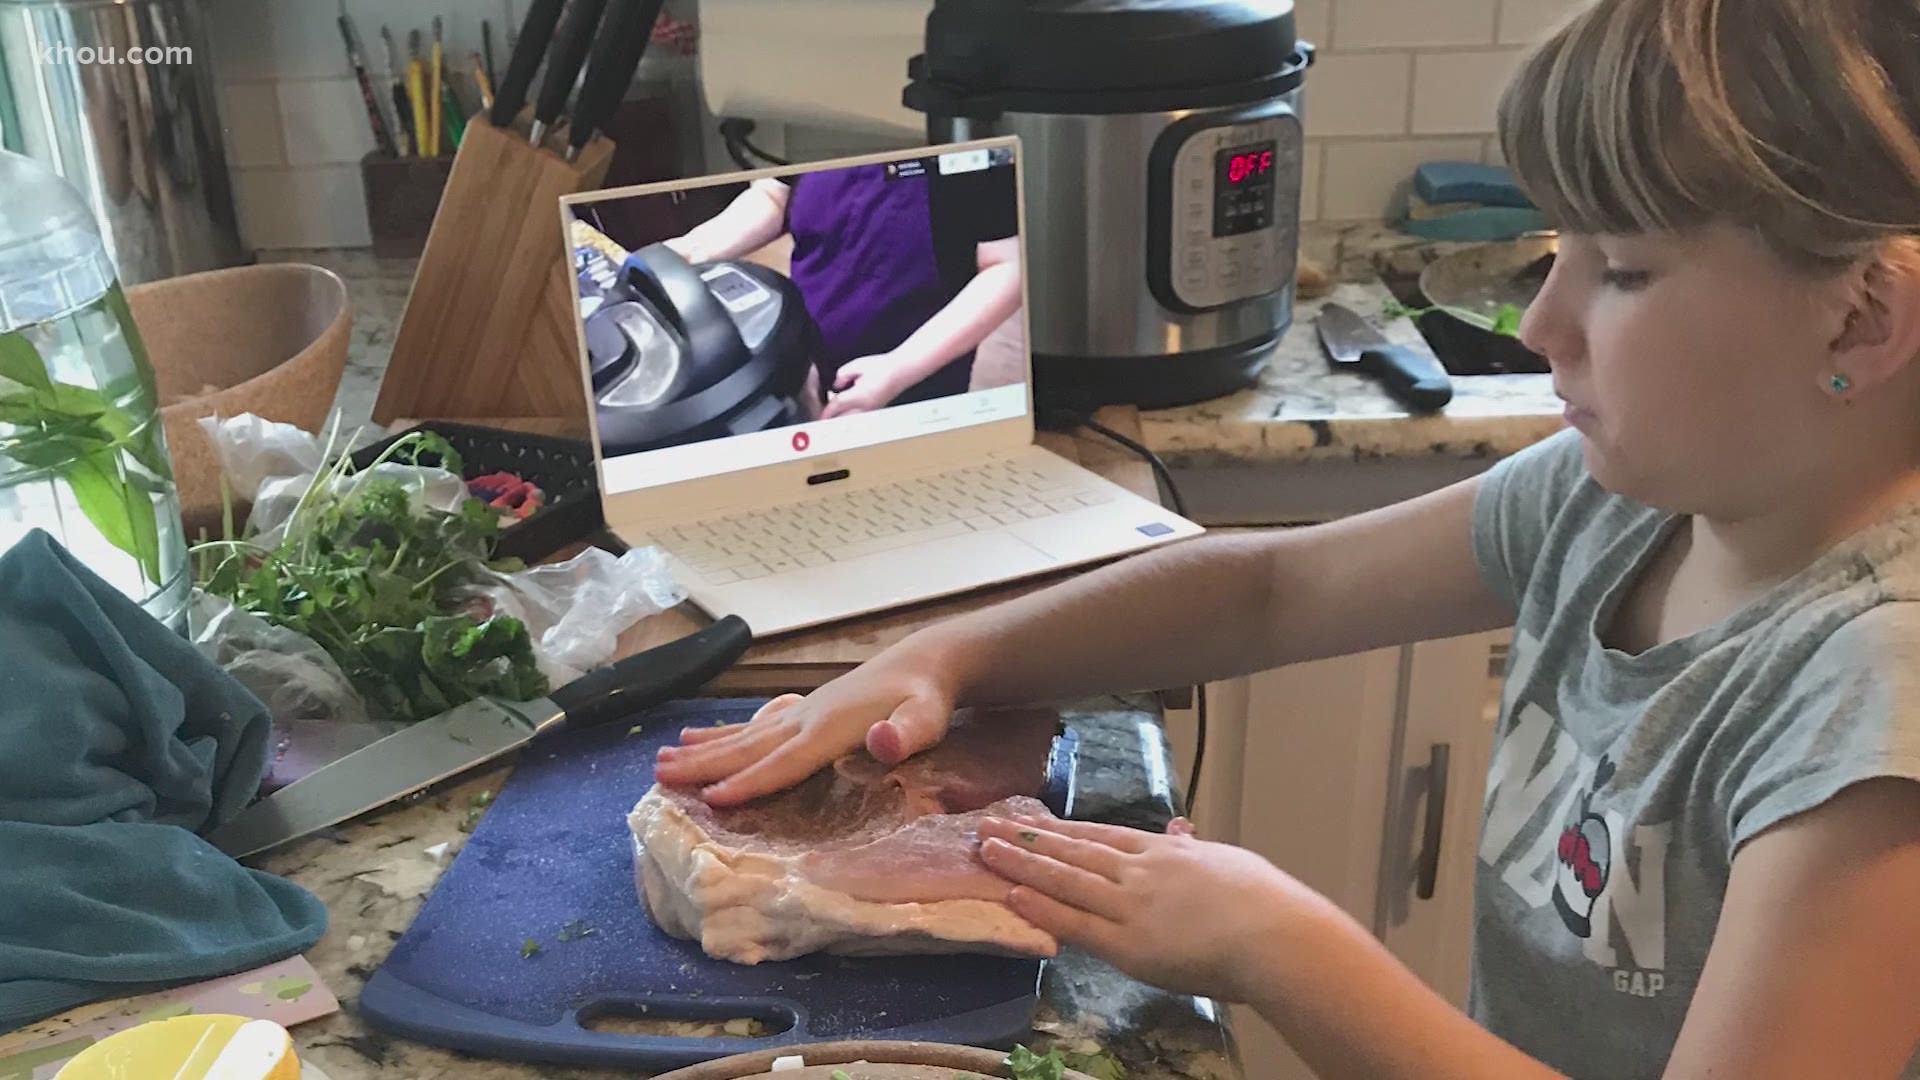 About 100 kids from across the U.S. are logging on to Brittany Collazo's free cooking class. Since it's on Zoom, there's plenty of space for your family to join.